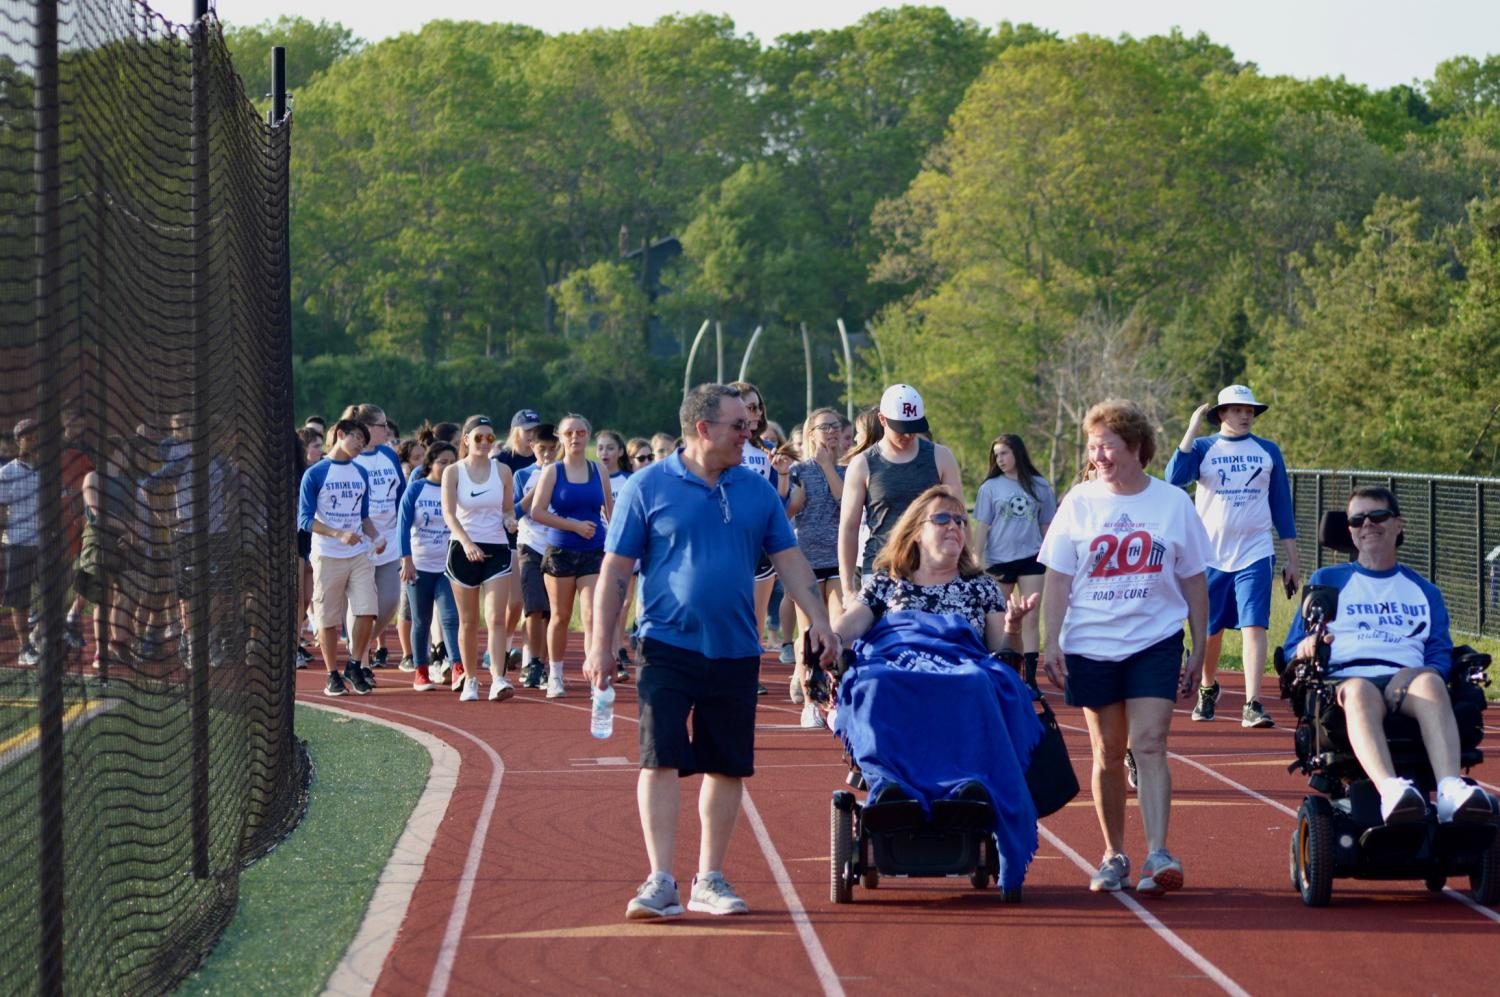 Participants begin the walk around the track at this years ALS: Ride for Life